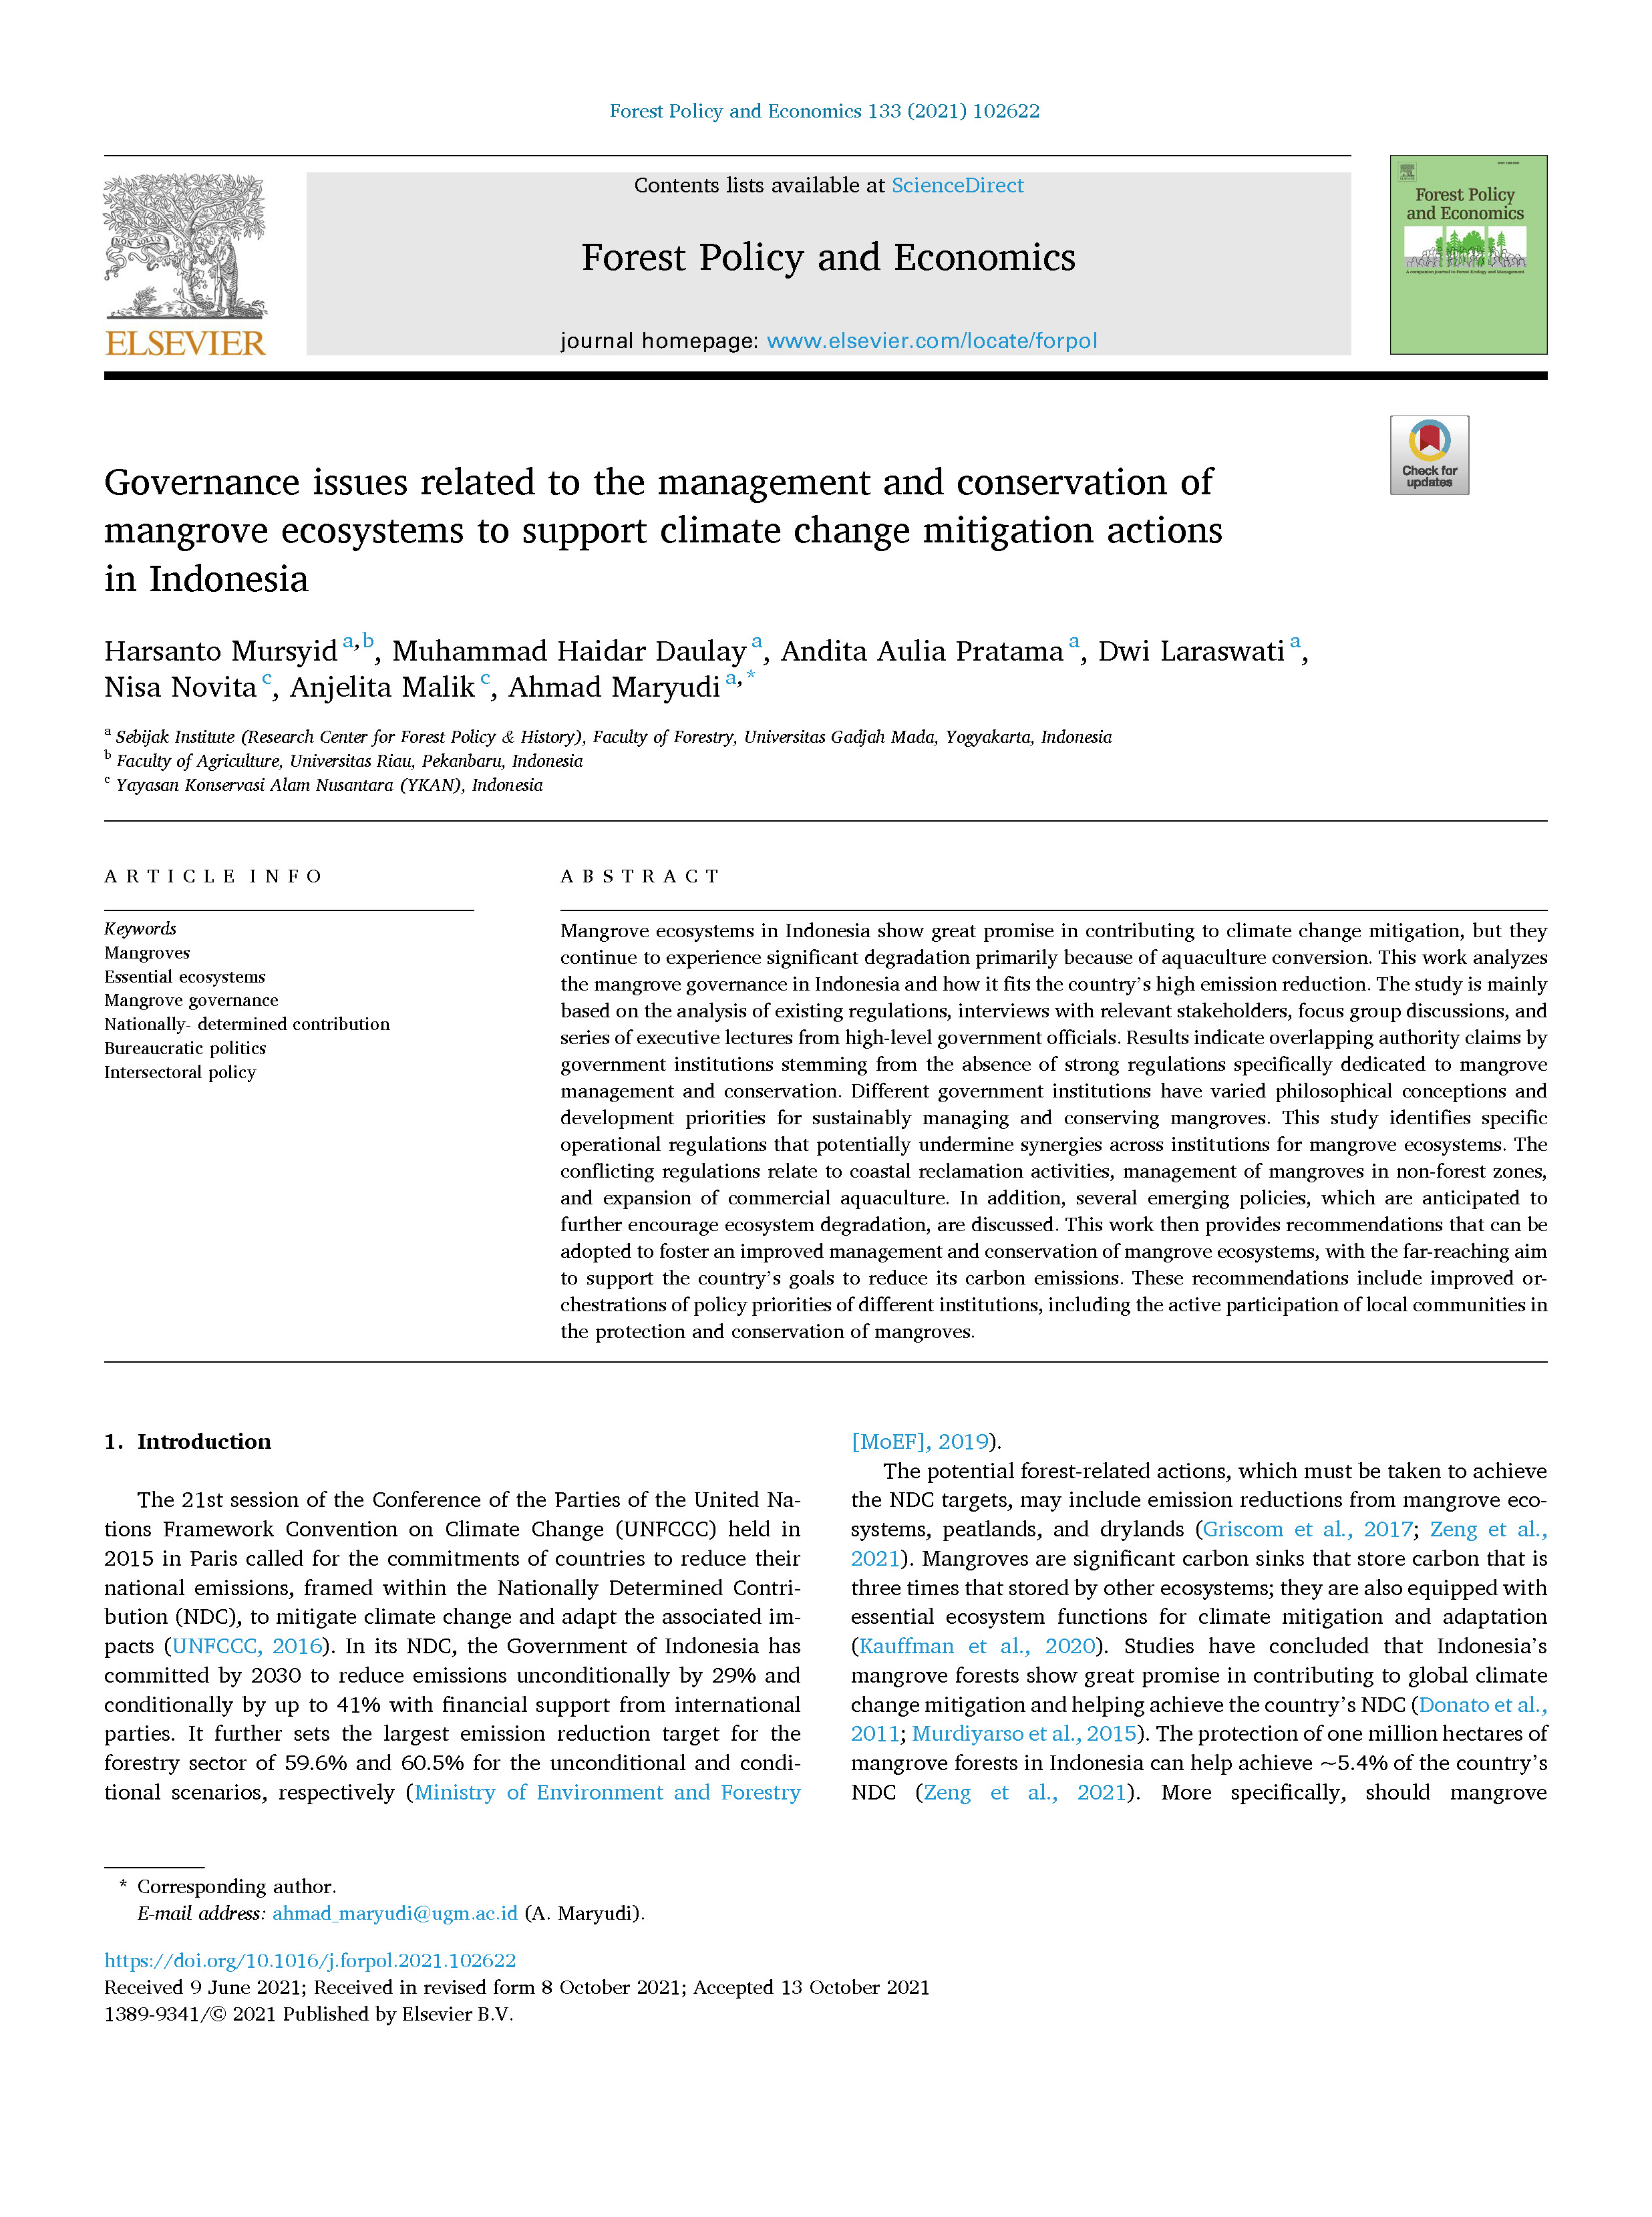 Governance issues related to the management and conservation of mangrove ecosystems to support climate change mitigation actions in Indonesia